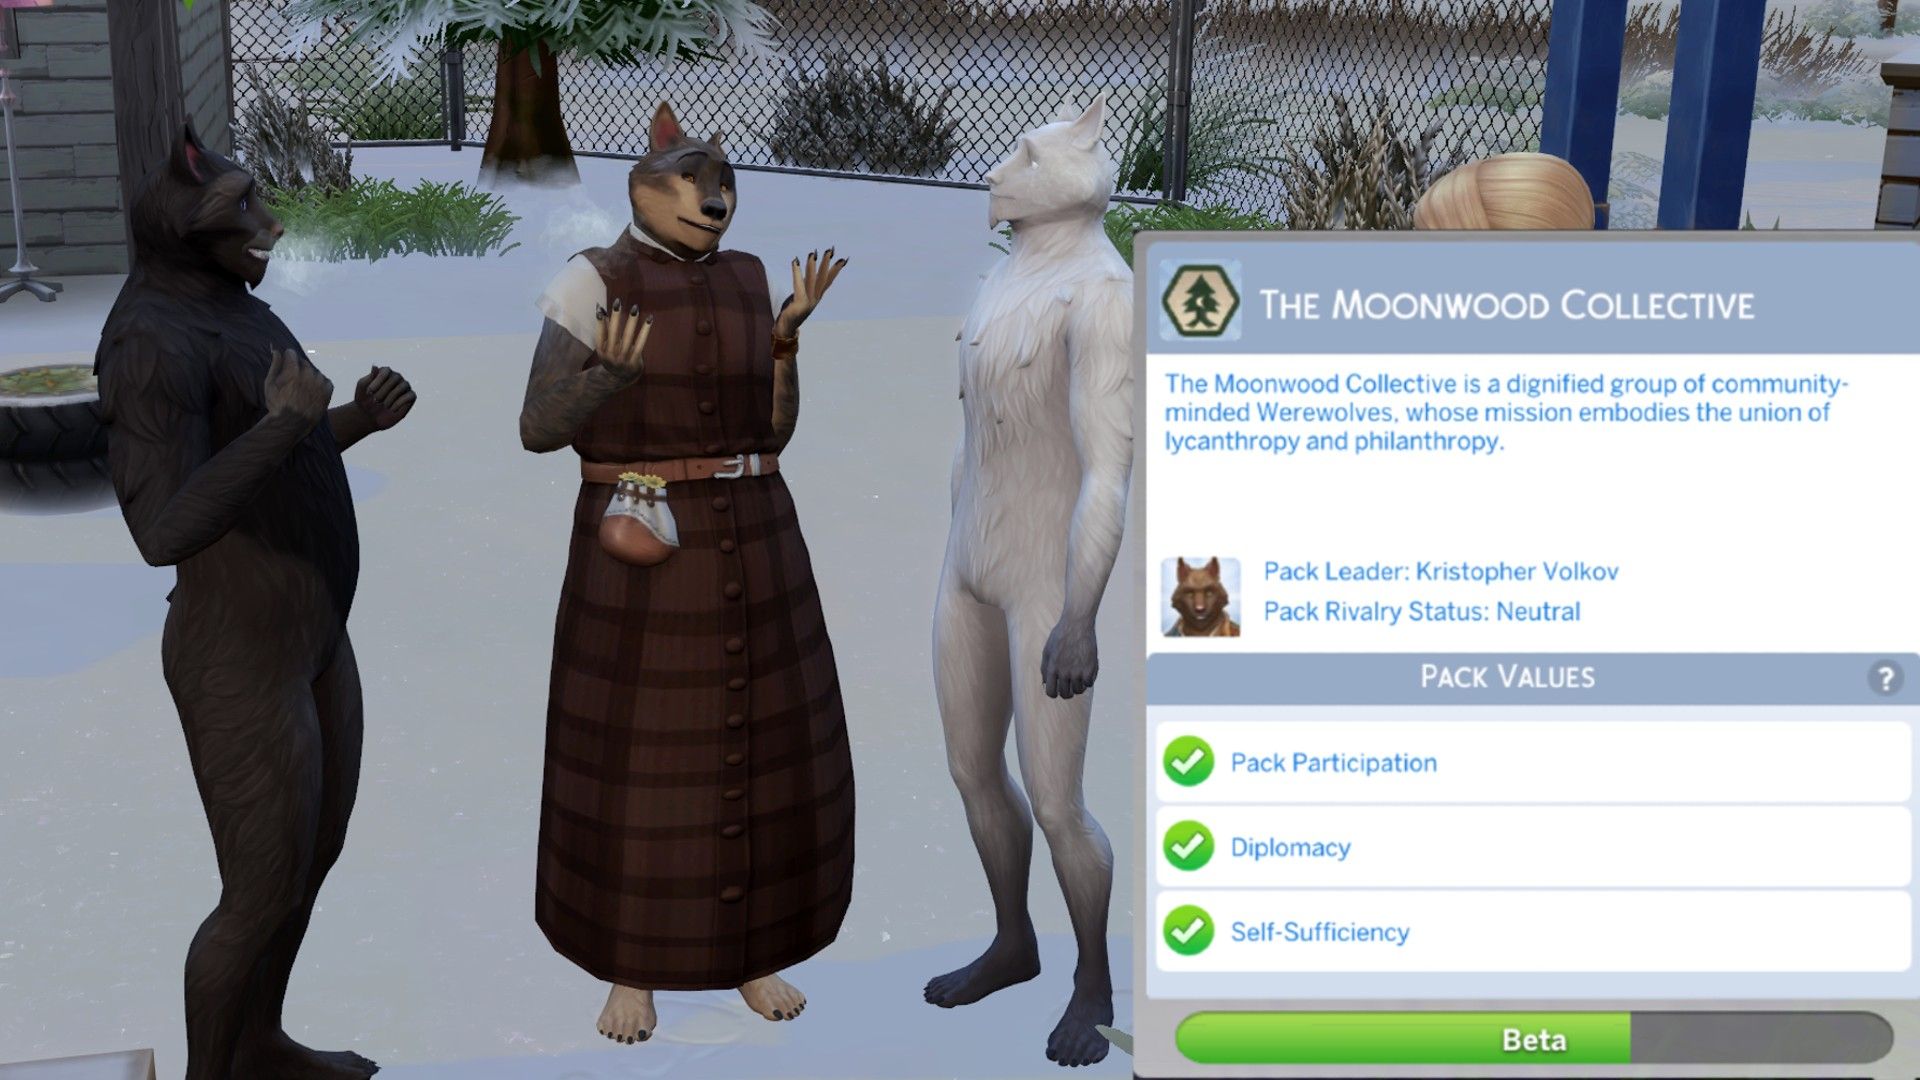 Collective Pack members chatting happily in Moonwood Mill in The Sims 4